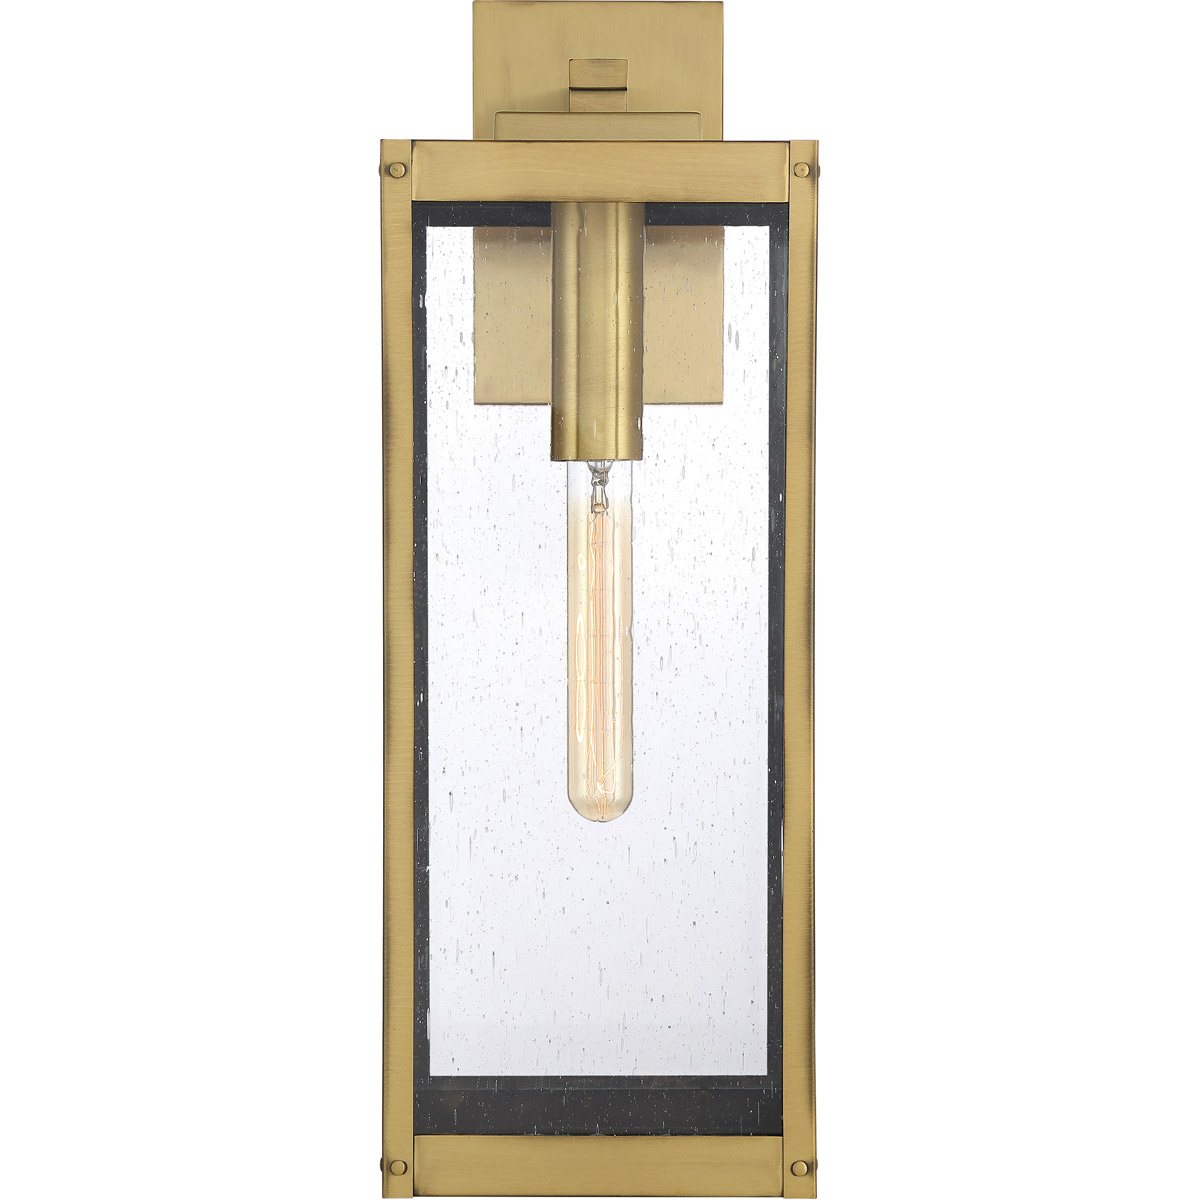 Quoizel WVR8407A Westover Modern Industrial Outdoor Wall Sconce Lighting 3 Lamps Buy - Best Online Lighting Stores